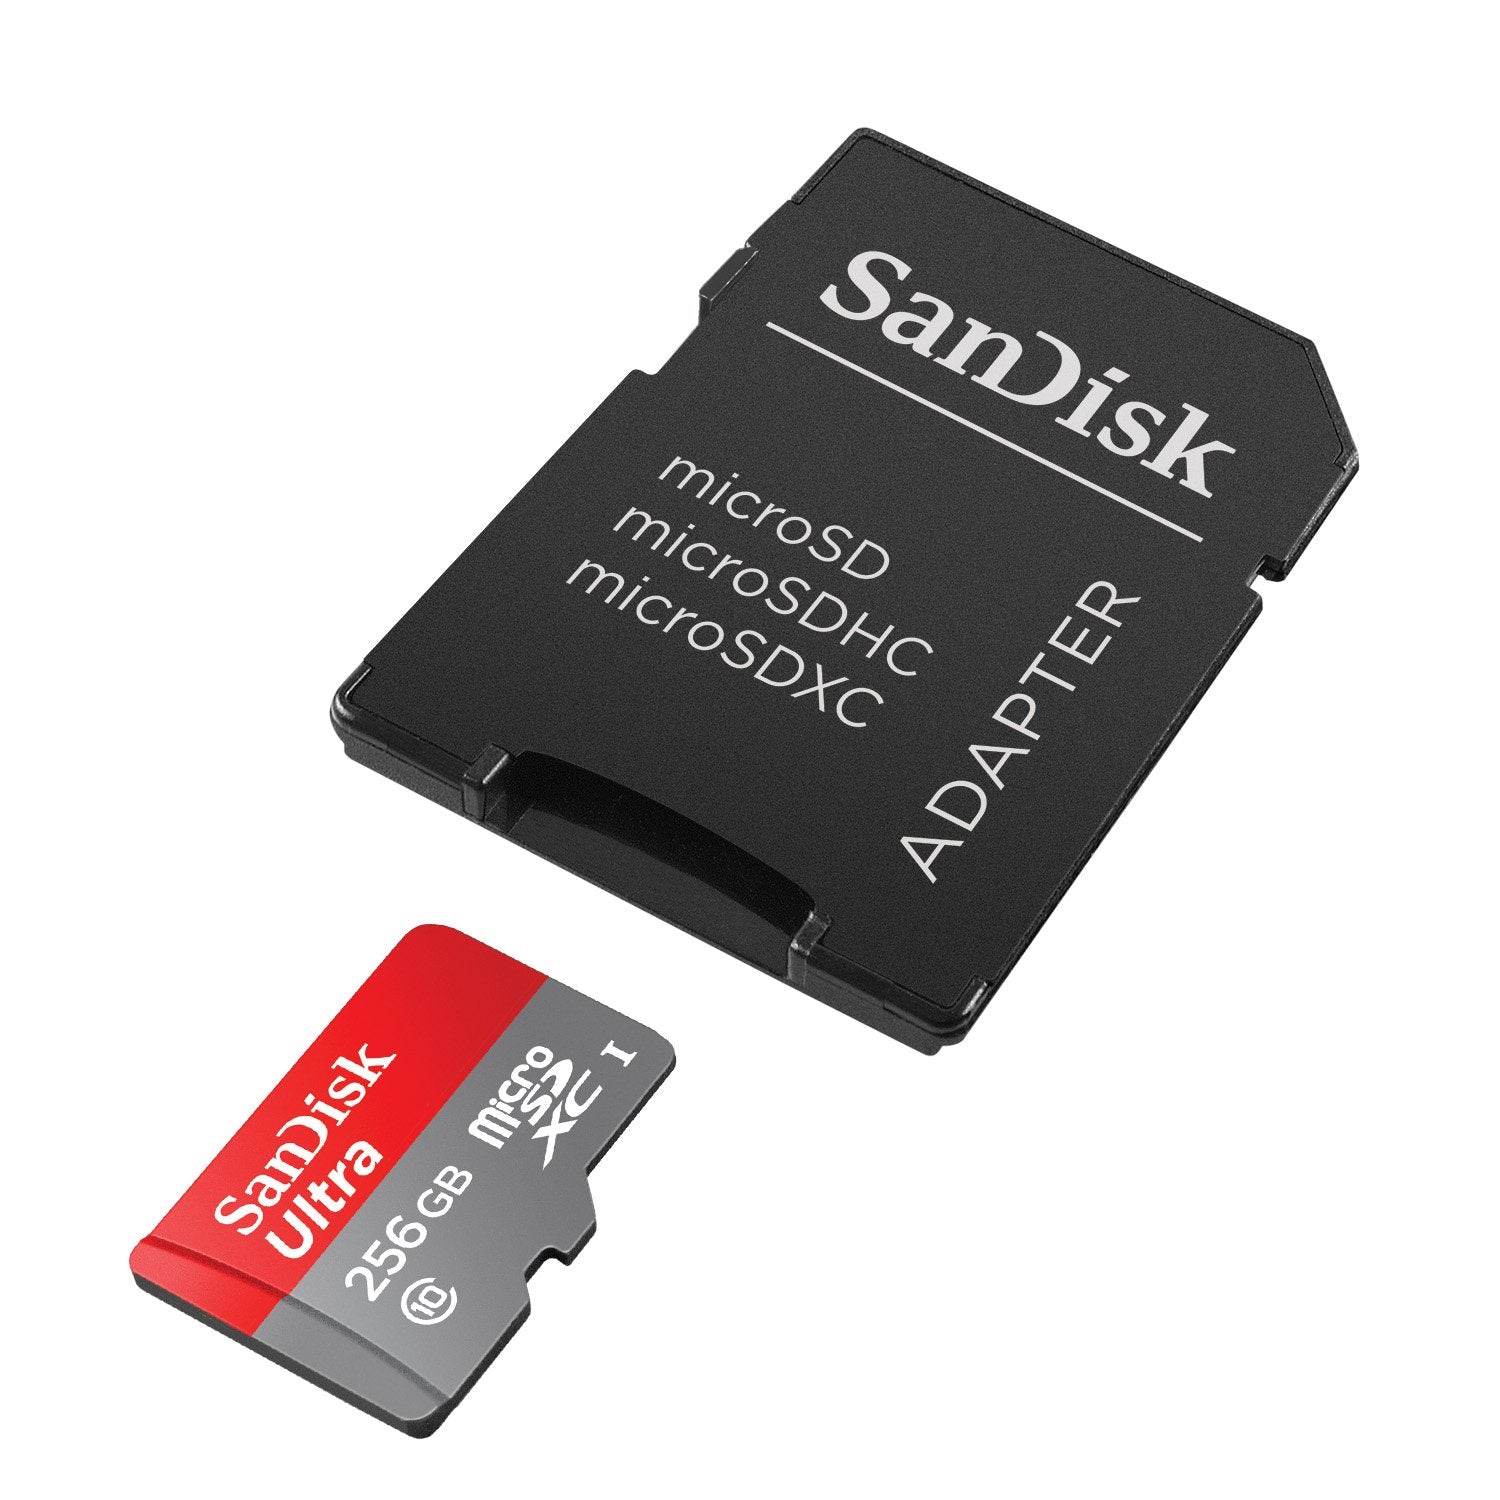 SanDisk Ultra 256GB MicroSDXC UHS-I Card with Adapter (SDSQUNI-256G-GN6MA)